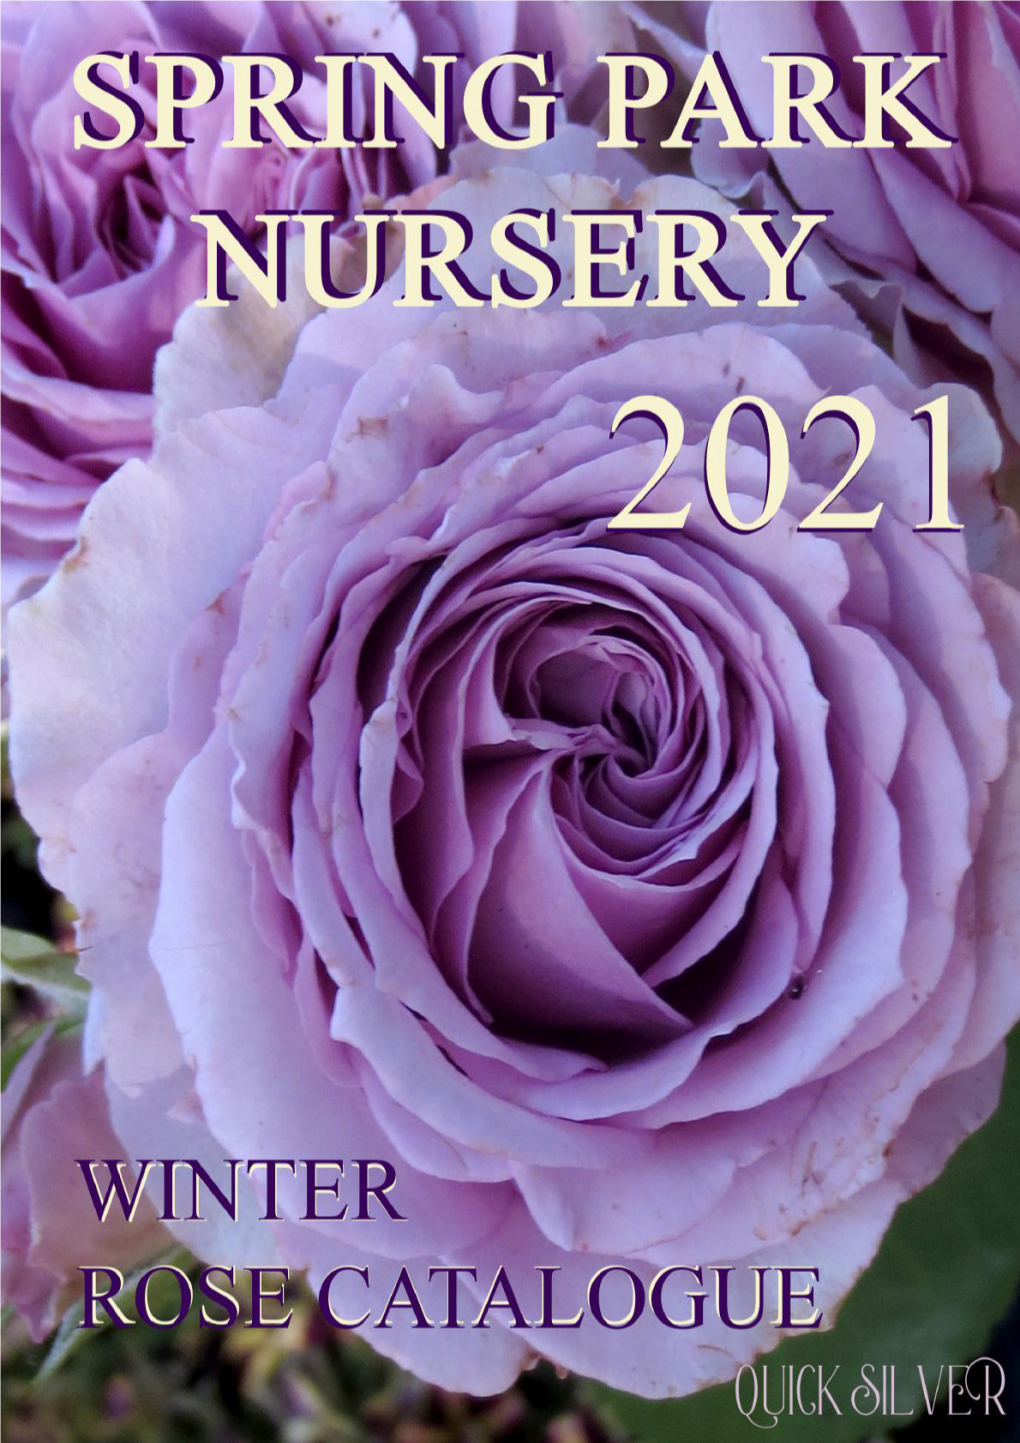 ORDERING YOUR ROSES for WINTER PLACING an ORDER by PHONE: You Can Place Your Orders During Business Hours on (03) 5348 3351